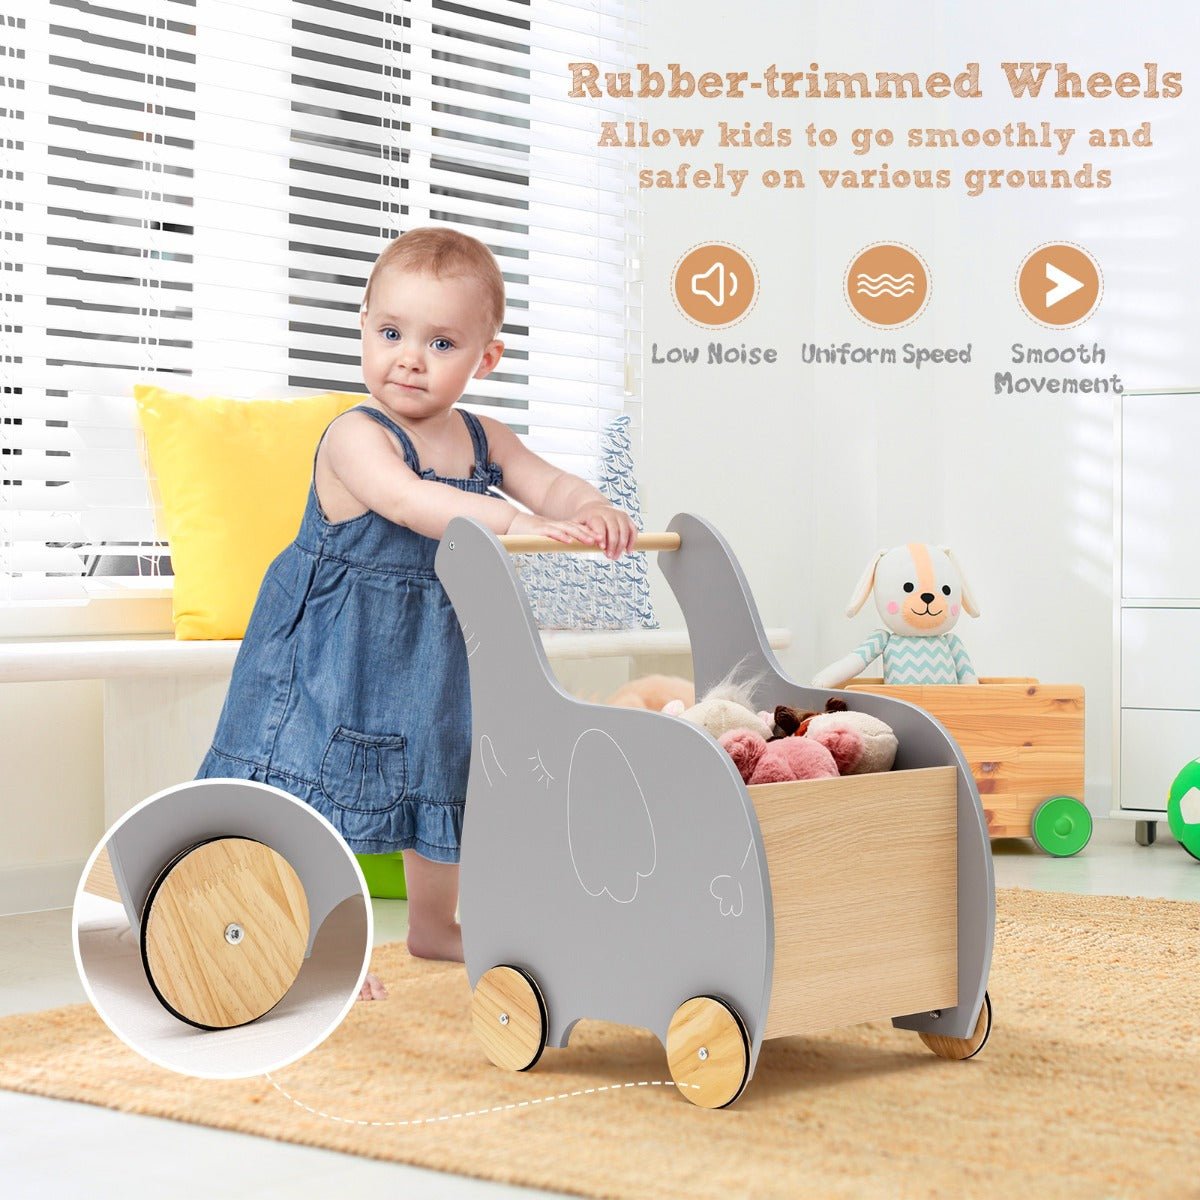 Wooden Grocery Cart for Kids - Rubber Wheels, Creative Shopping Adventure